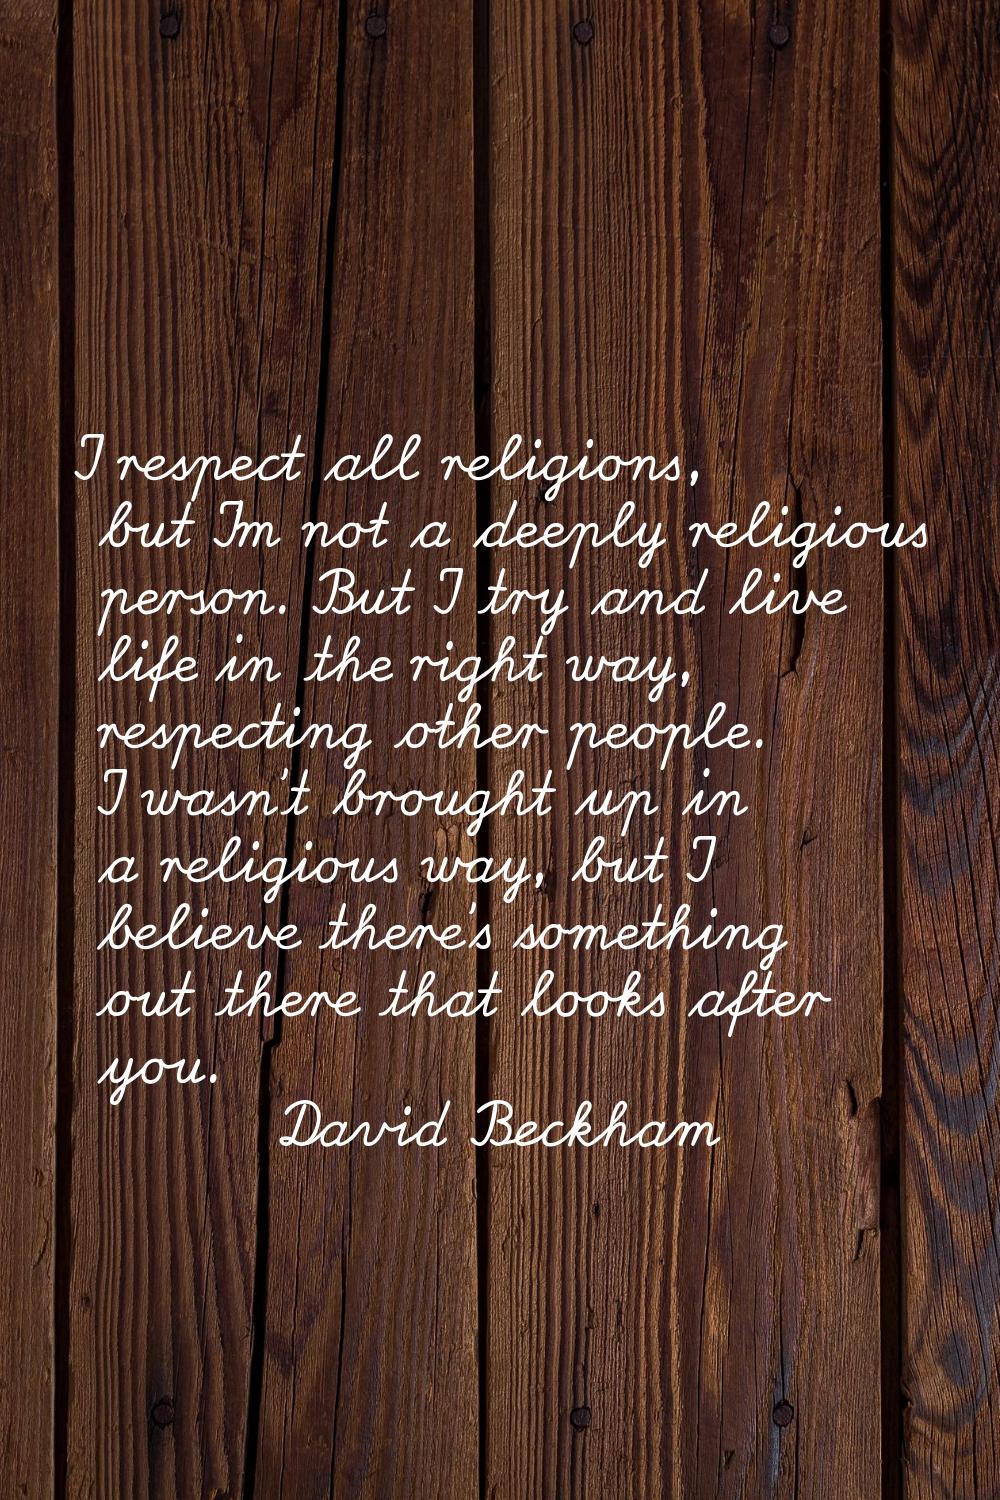 I respect all religions, but I'm not a deeply religious person. But I try and live life in the righ